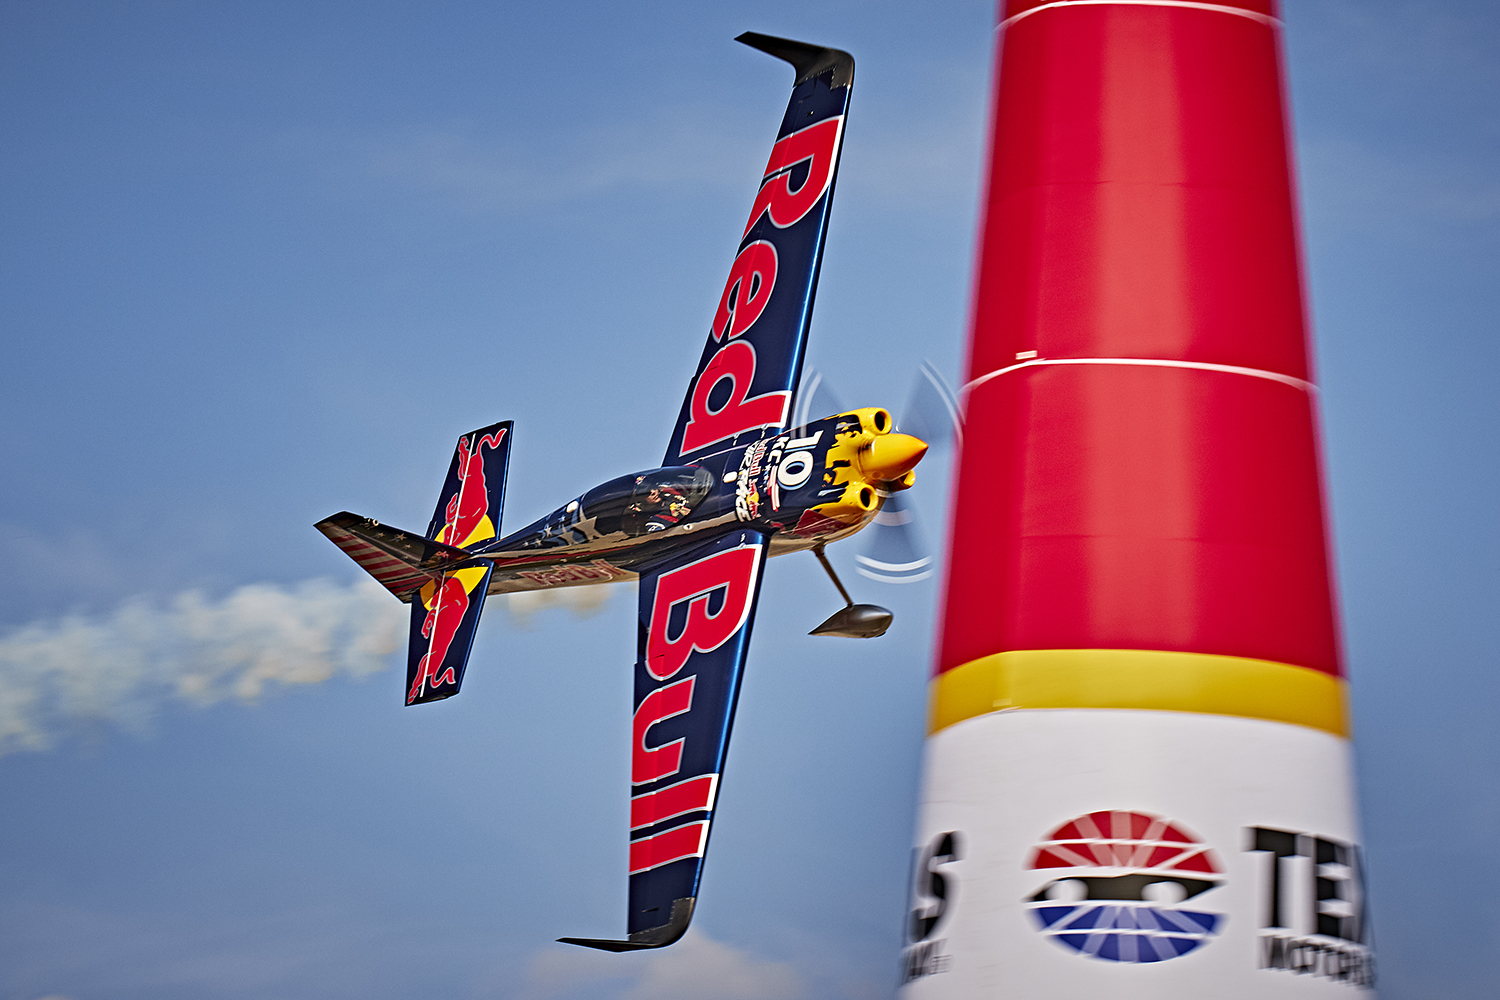 19-facts-about-red-bull-air-race